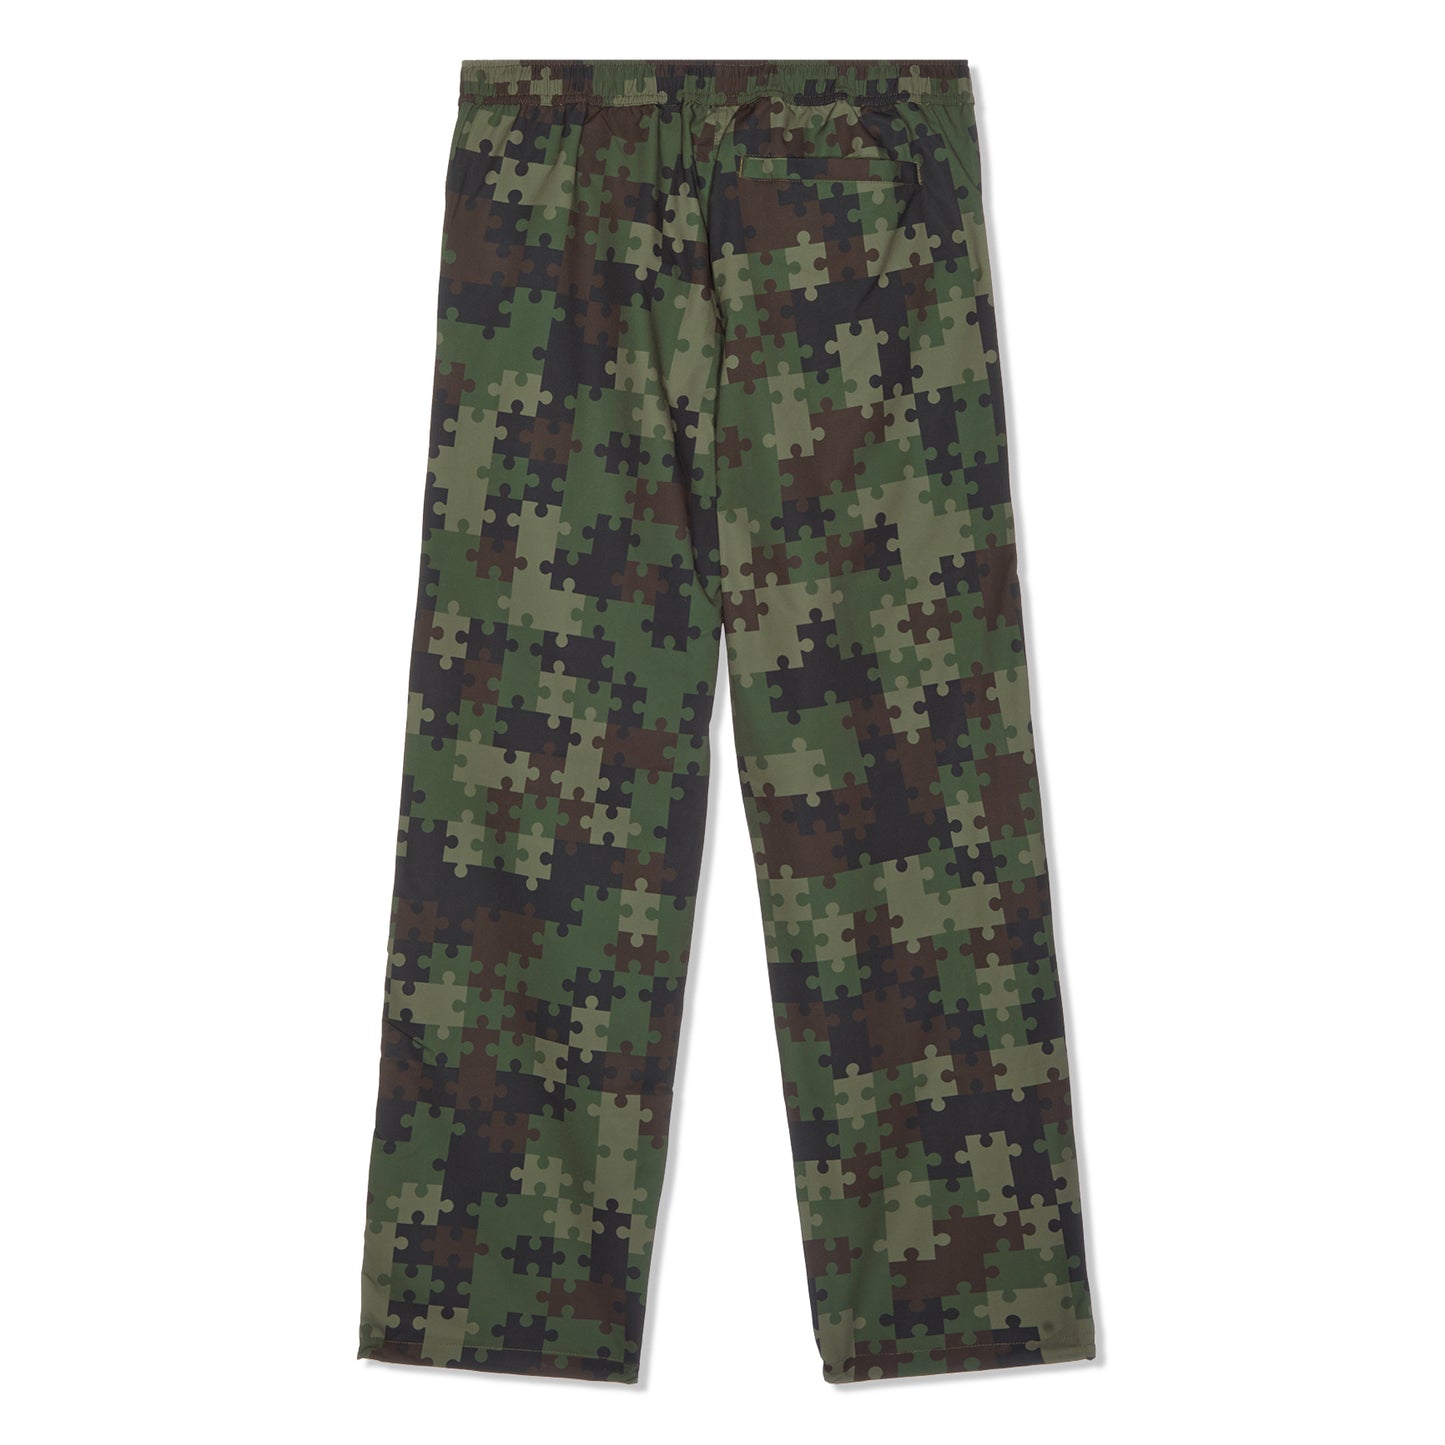 Dime Relaxed Zip Pants (Puzzle Camo)